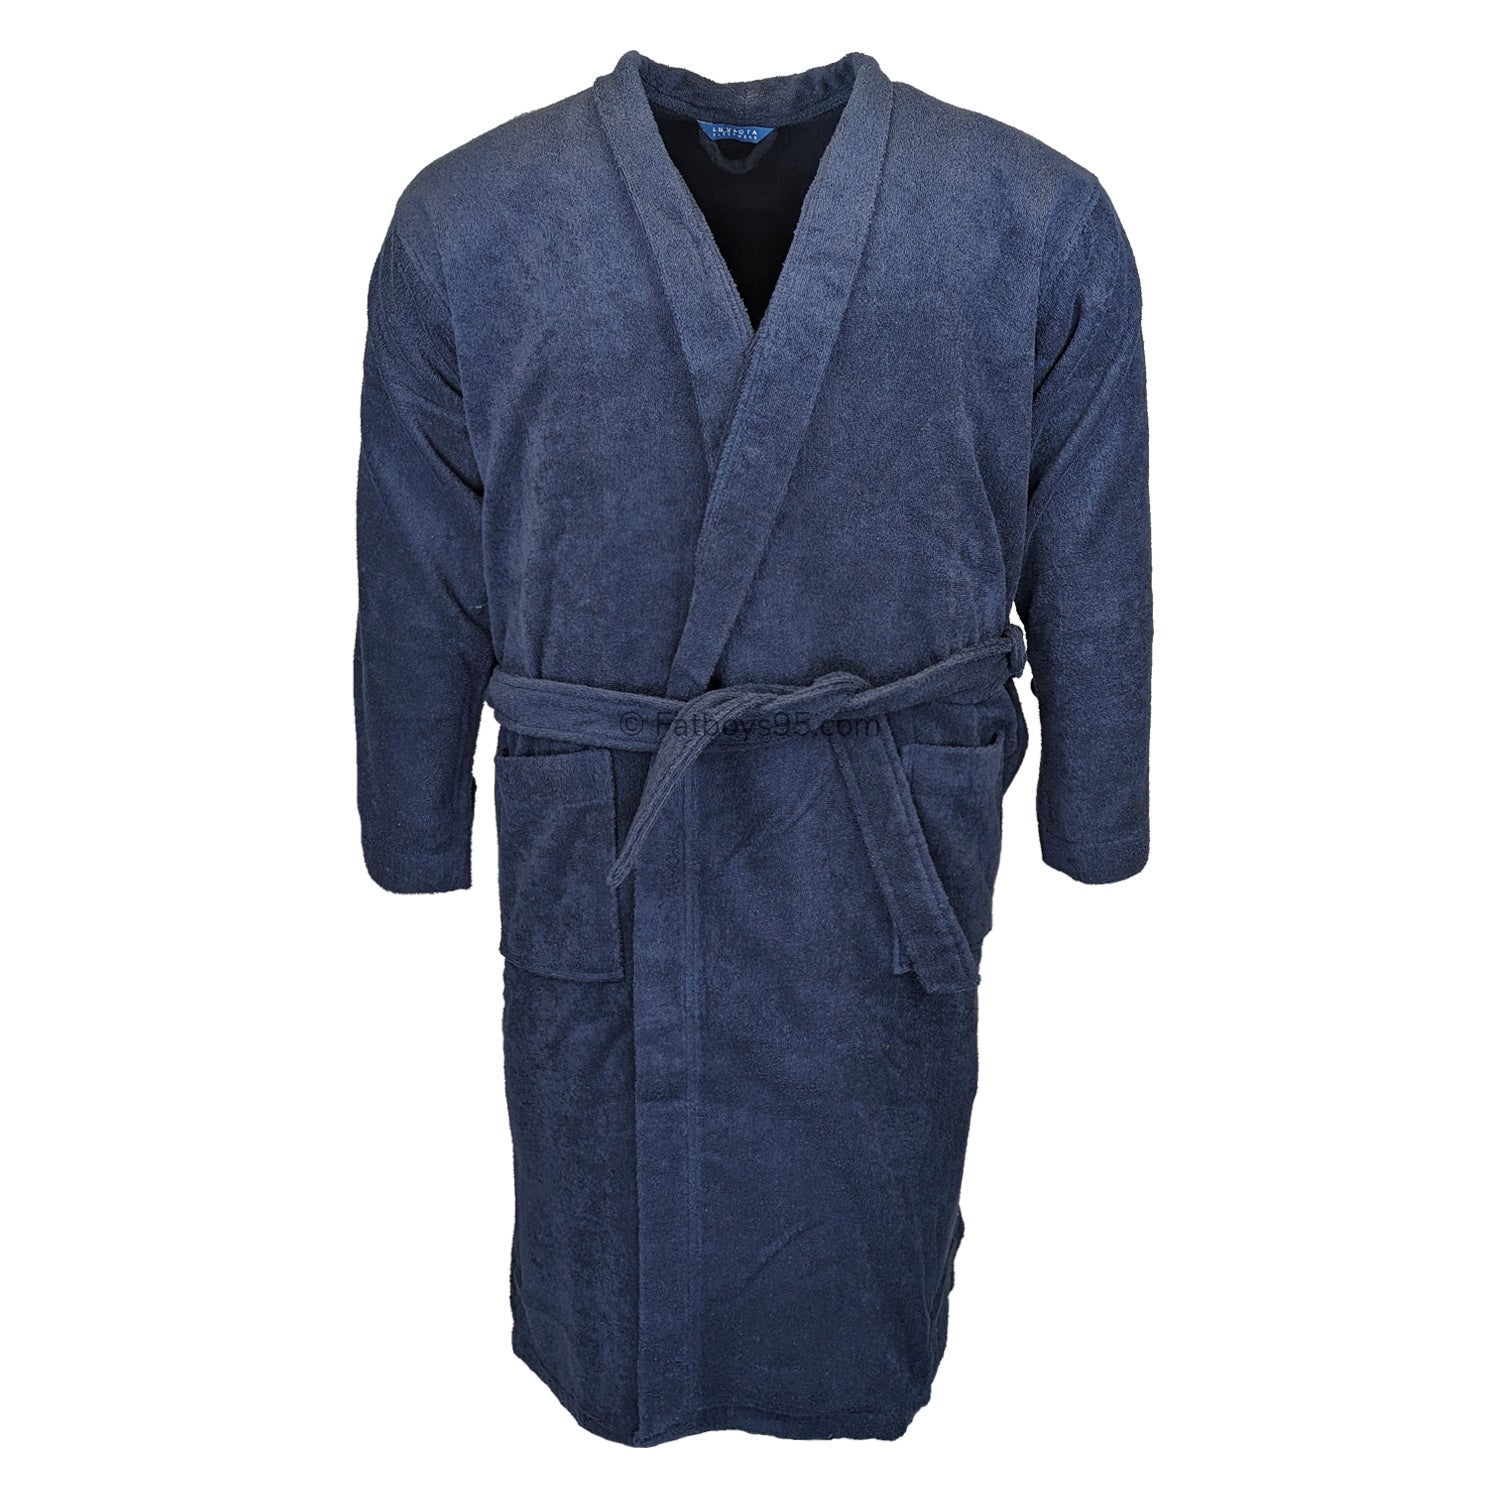 Bridesmaid Robe Set of 7, Personalized Robes in Front & Back, 26 Colors, 3T- 6XL – Gifts Are Blue